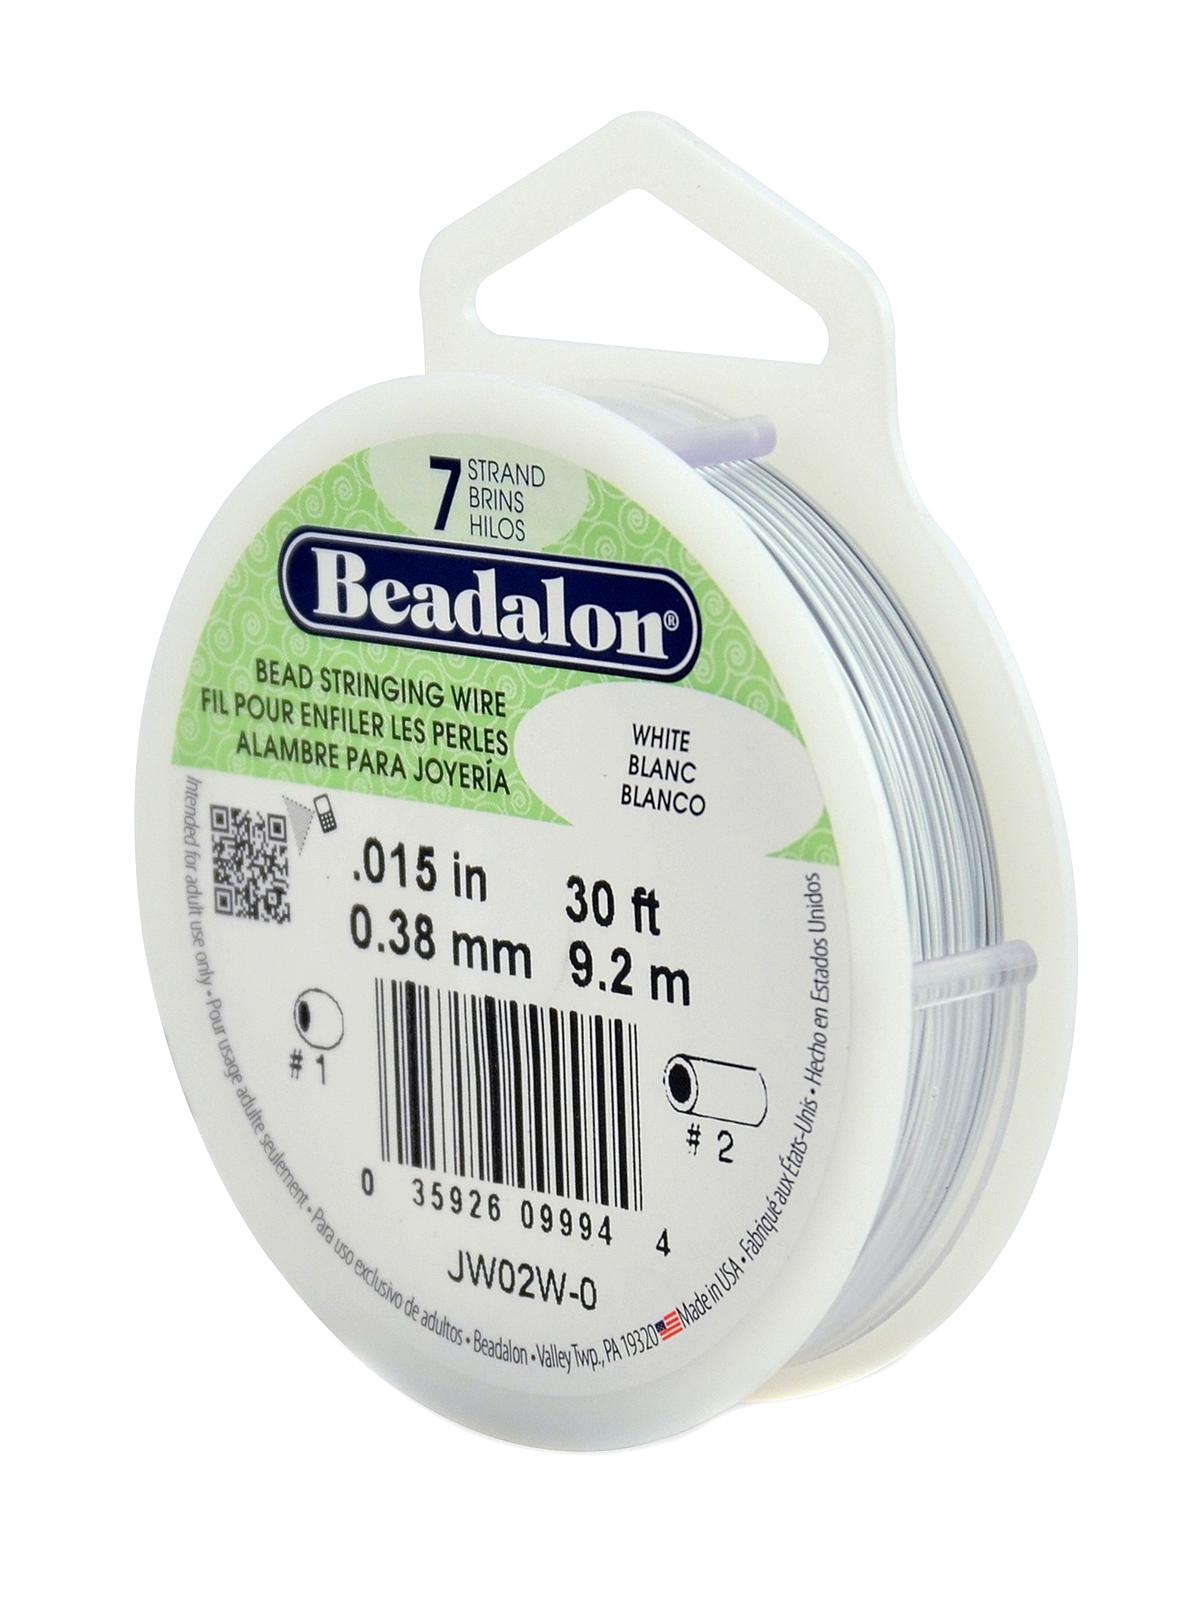 7 Strand Bead Stringing Wire White .015 In. (0.38 Mm) 30 Ft. Spool